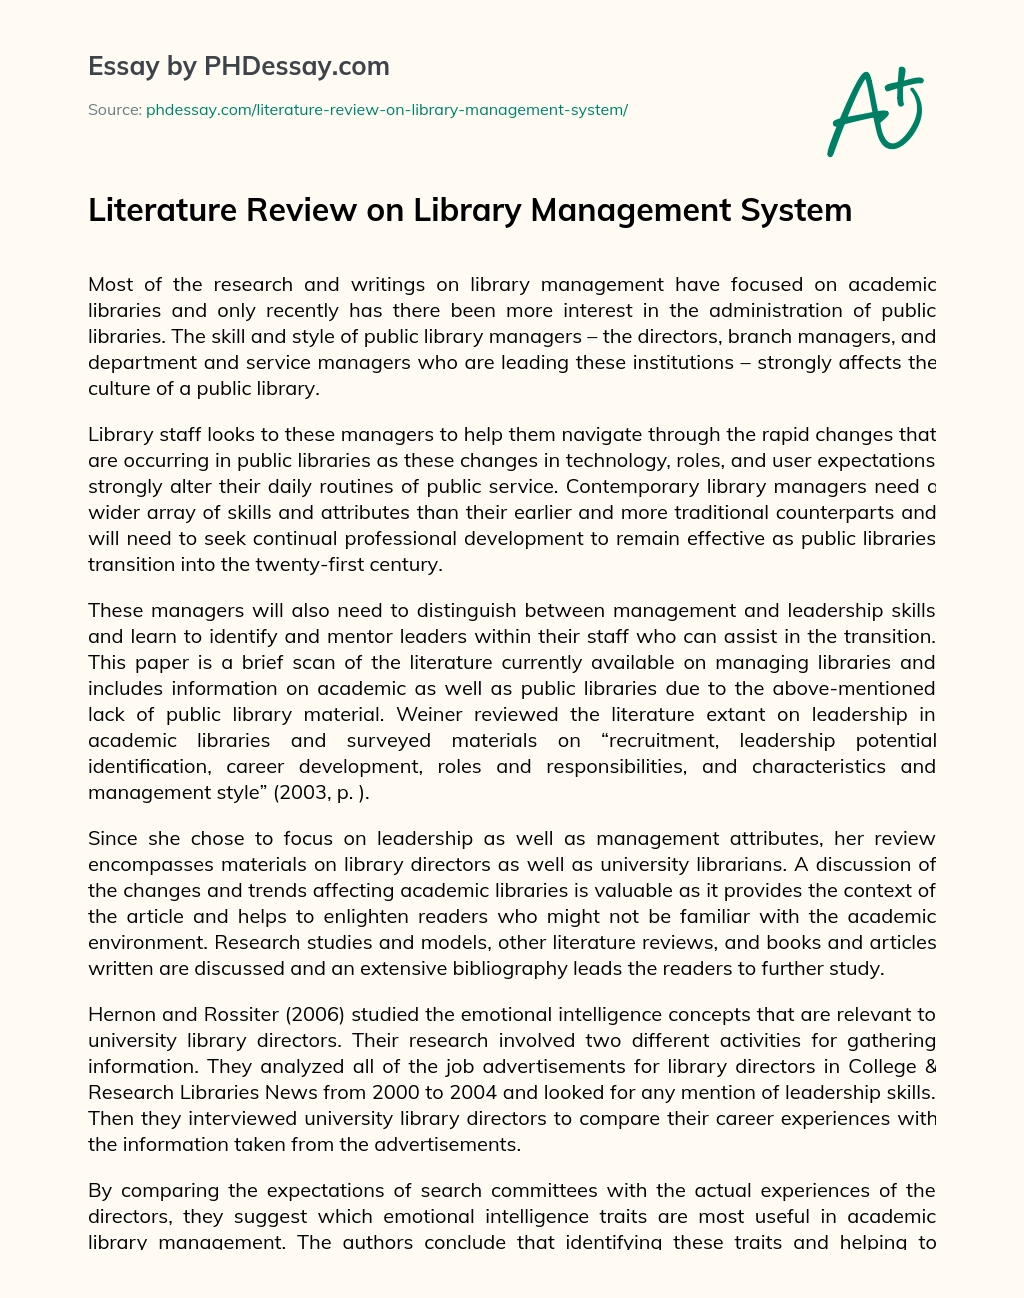 Literature Review on Library Management System essay